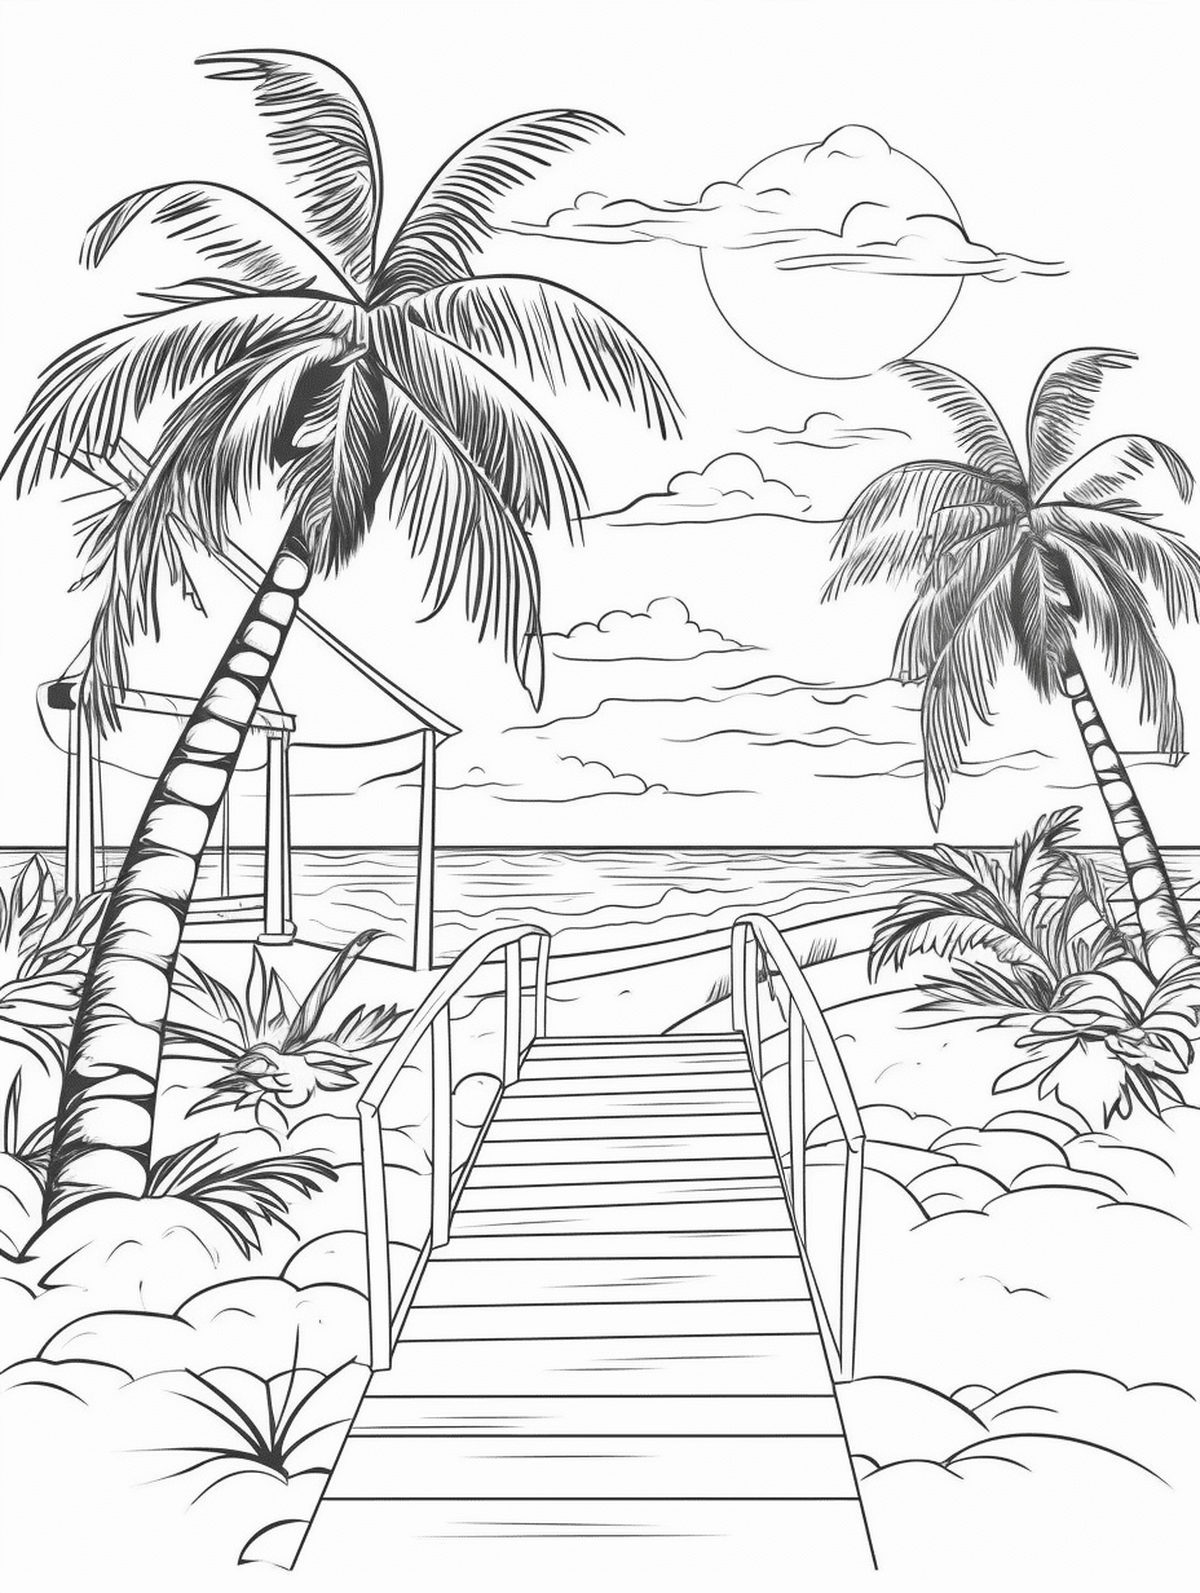 Printable Beach Day Summer Coloring Page for kids.